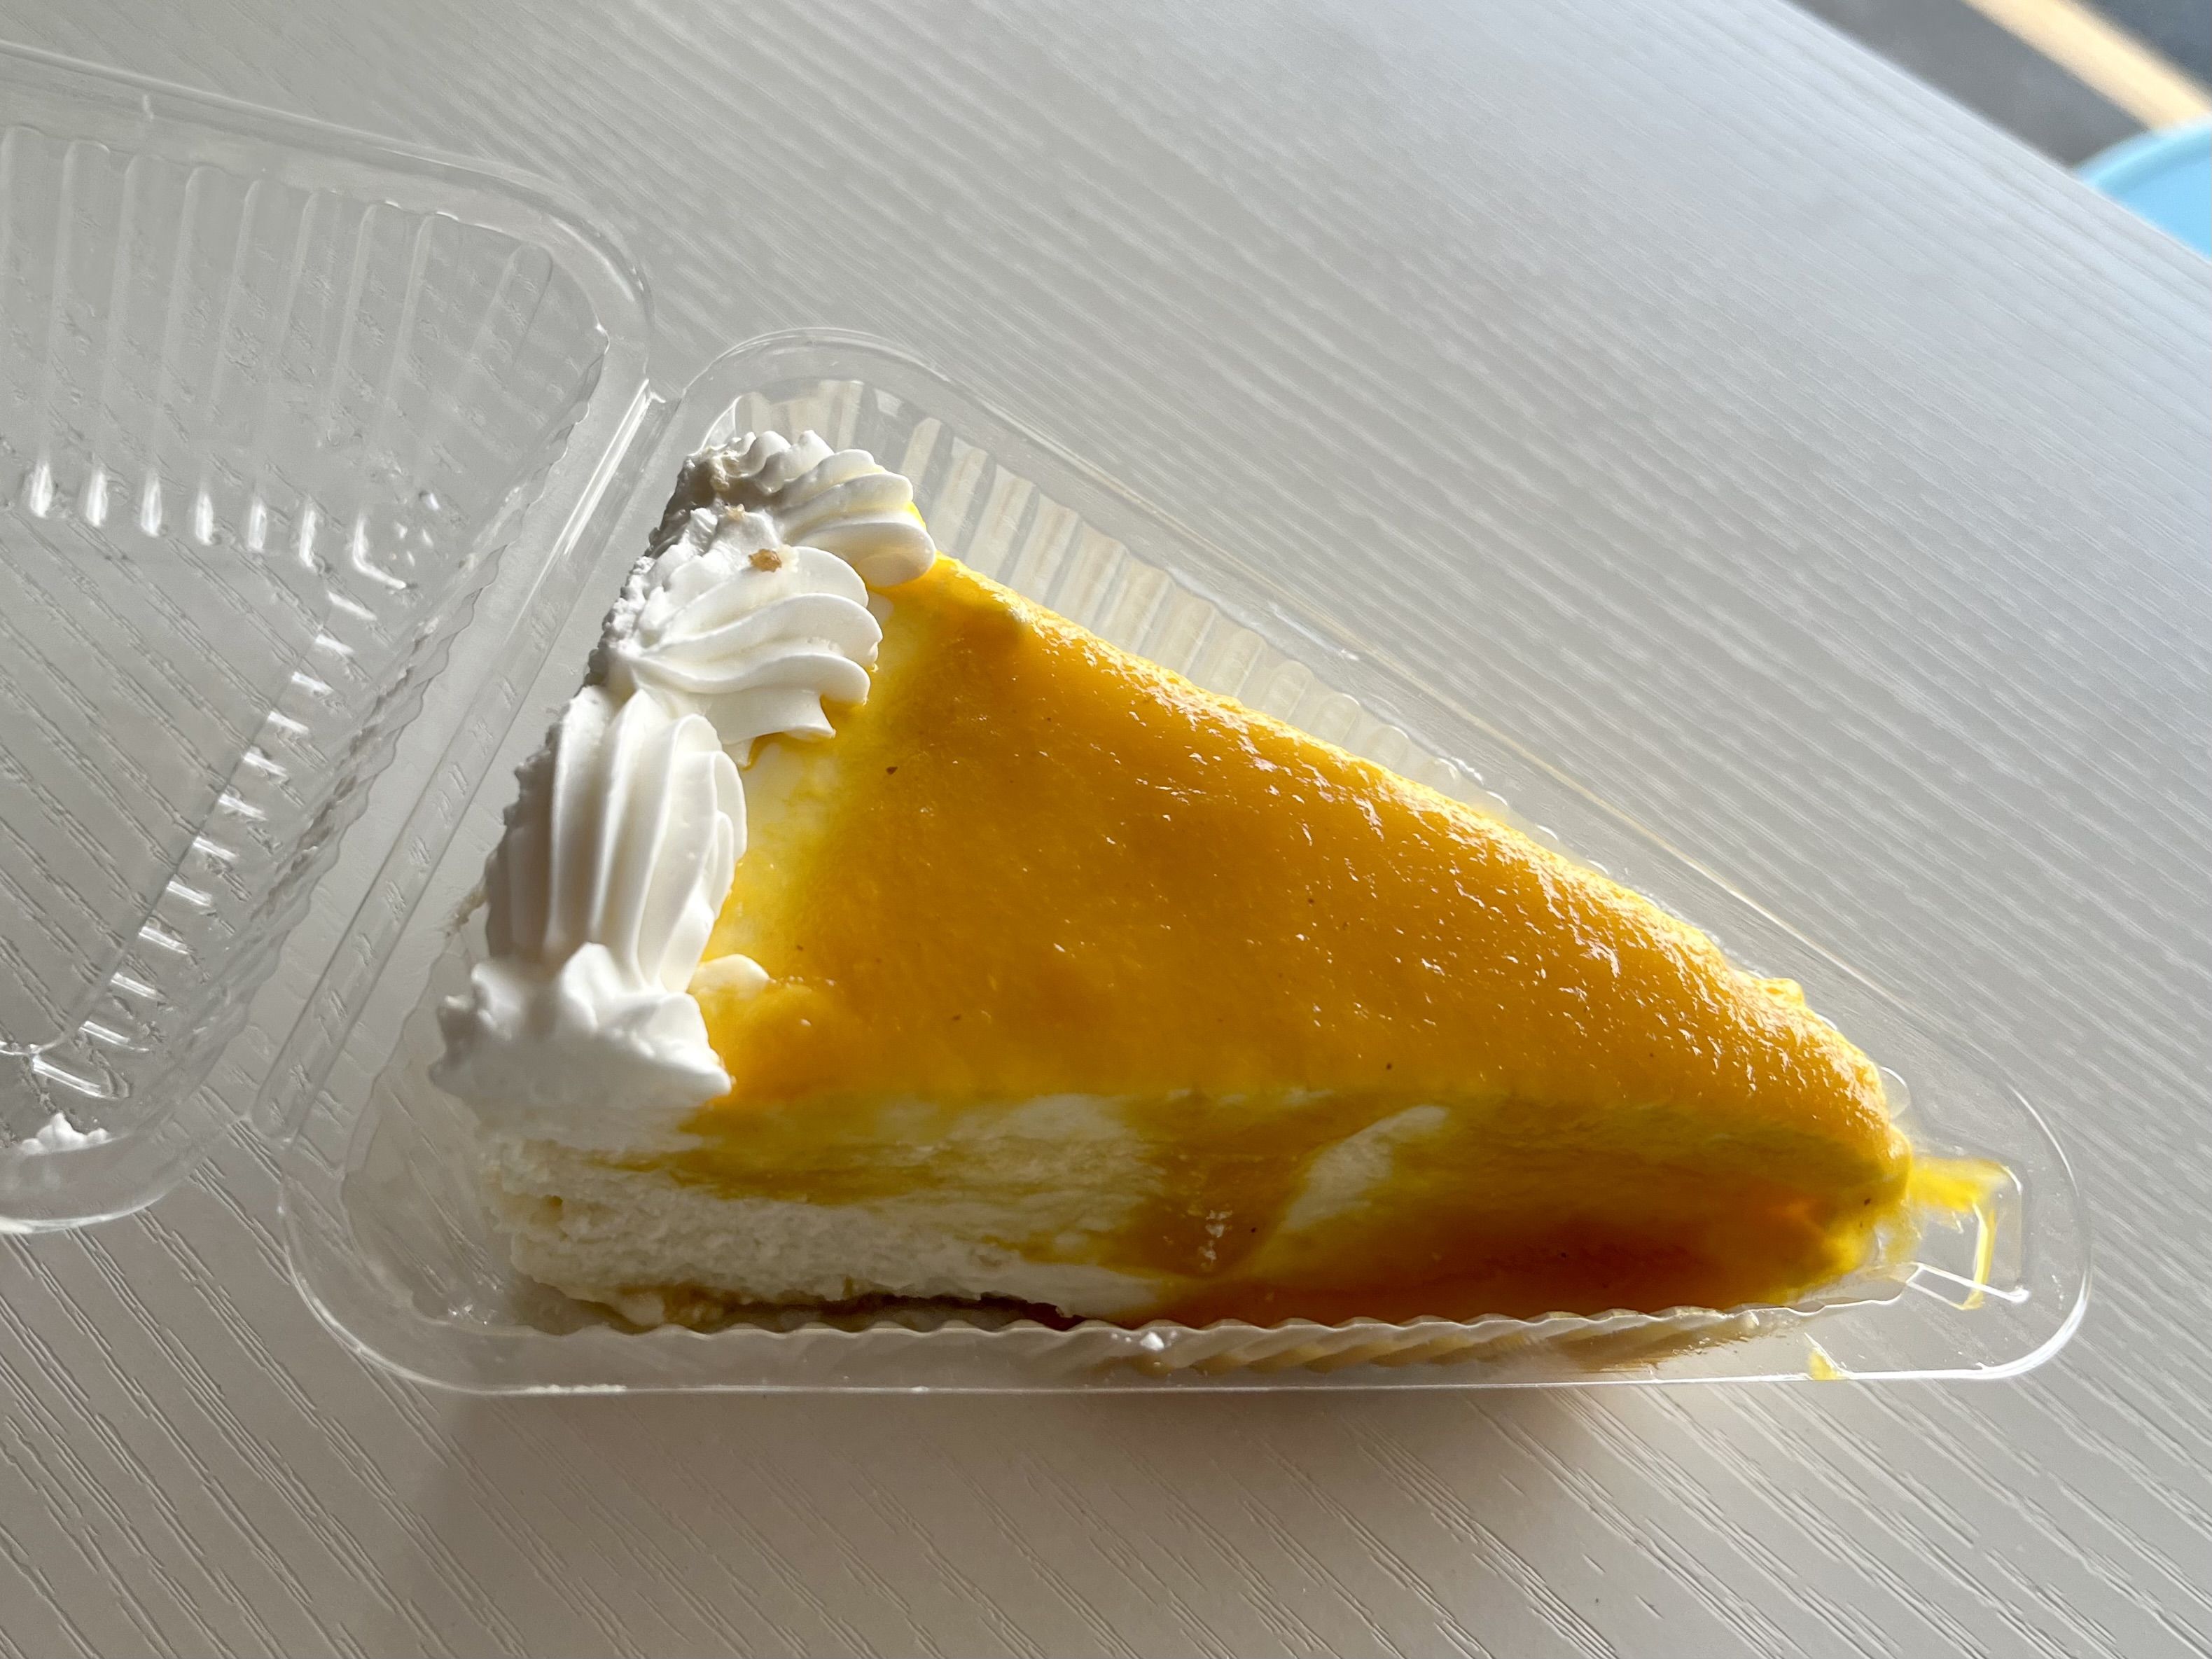 A slice of cheesecake, topped with a glossy orange glaze.